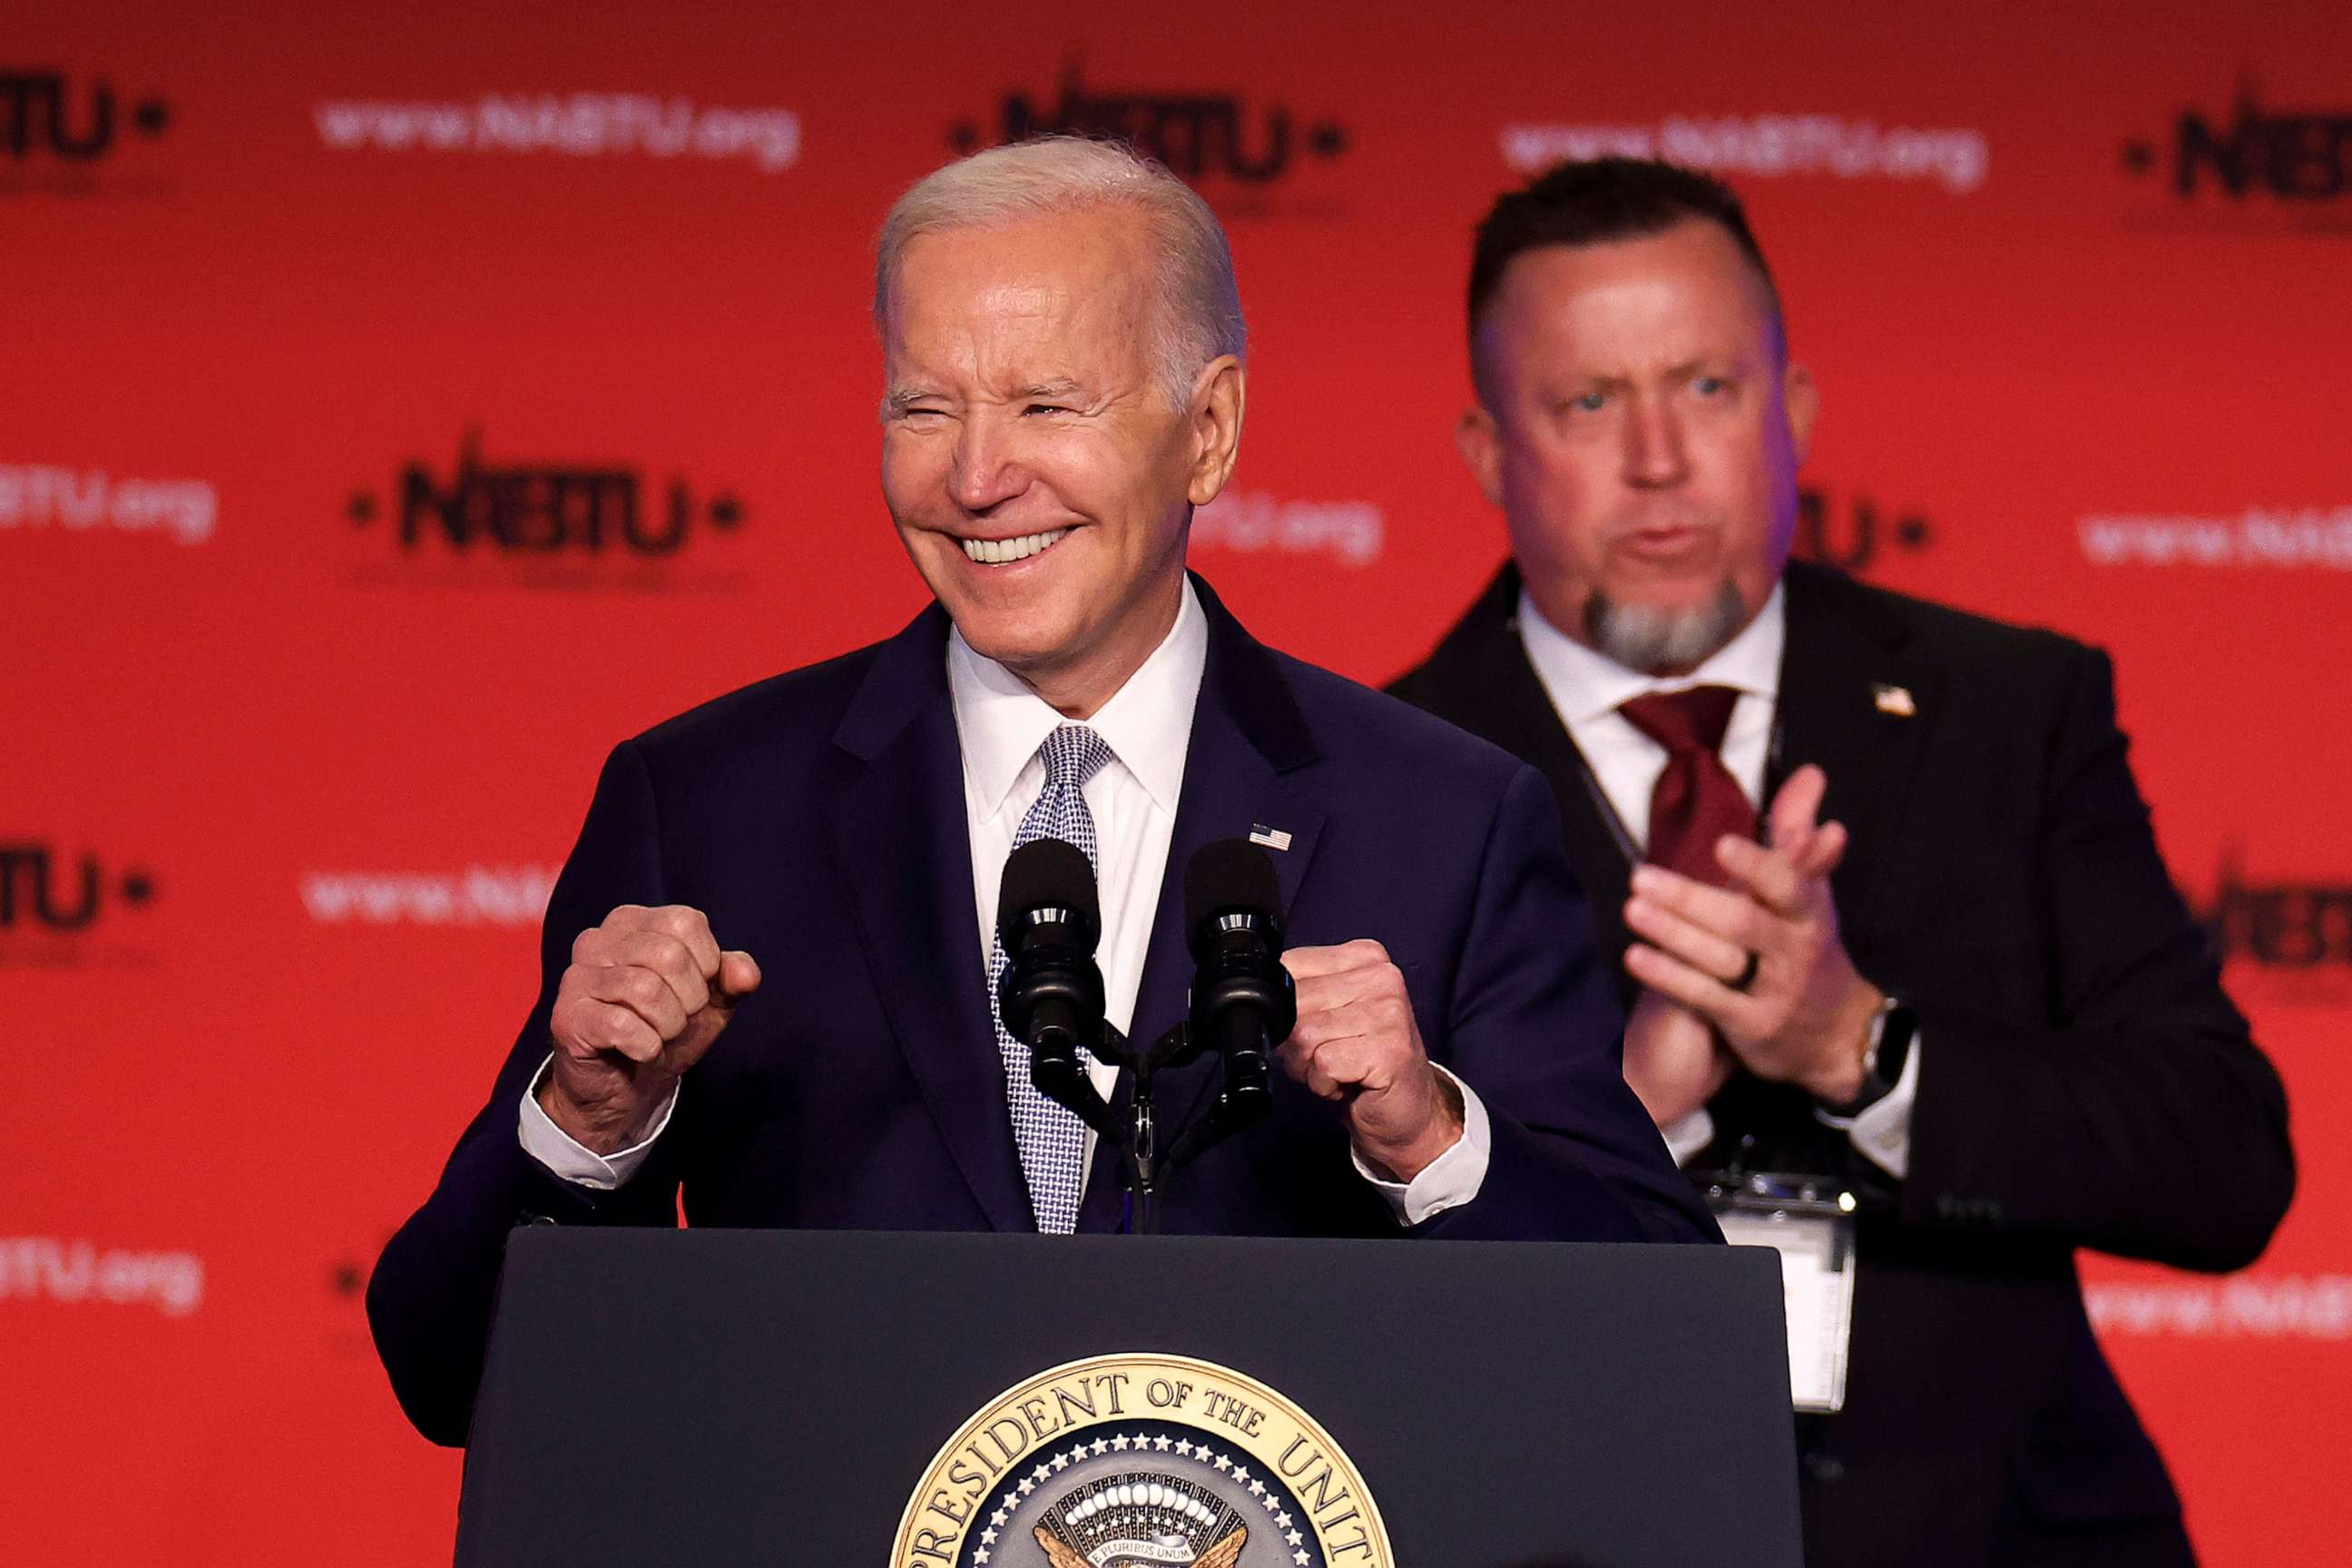 PHOTO: President Joe Biden is welcomed to the stage by North America's Building Trades Unions Secretary-Treasurer Brandon Bish during their legislative conference at the Washington Hilton, on April 25, 2023, in Washington, D.C.